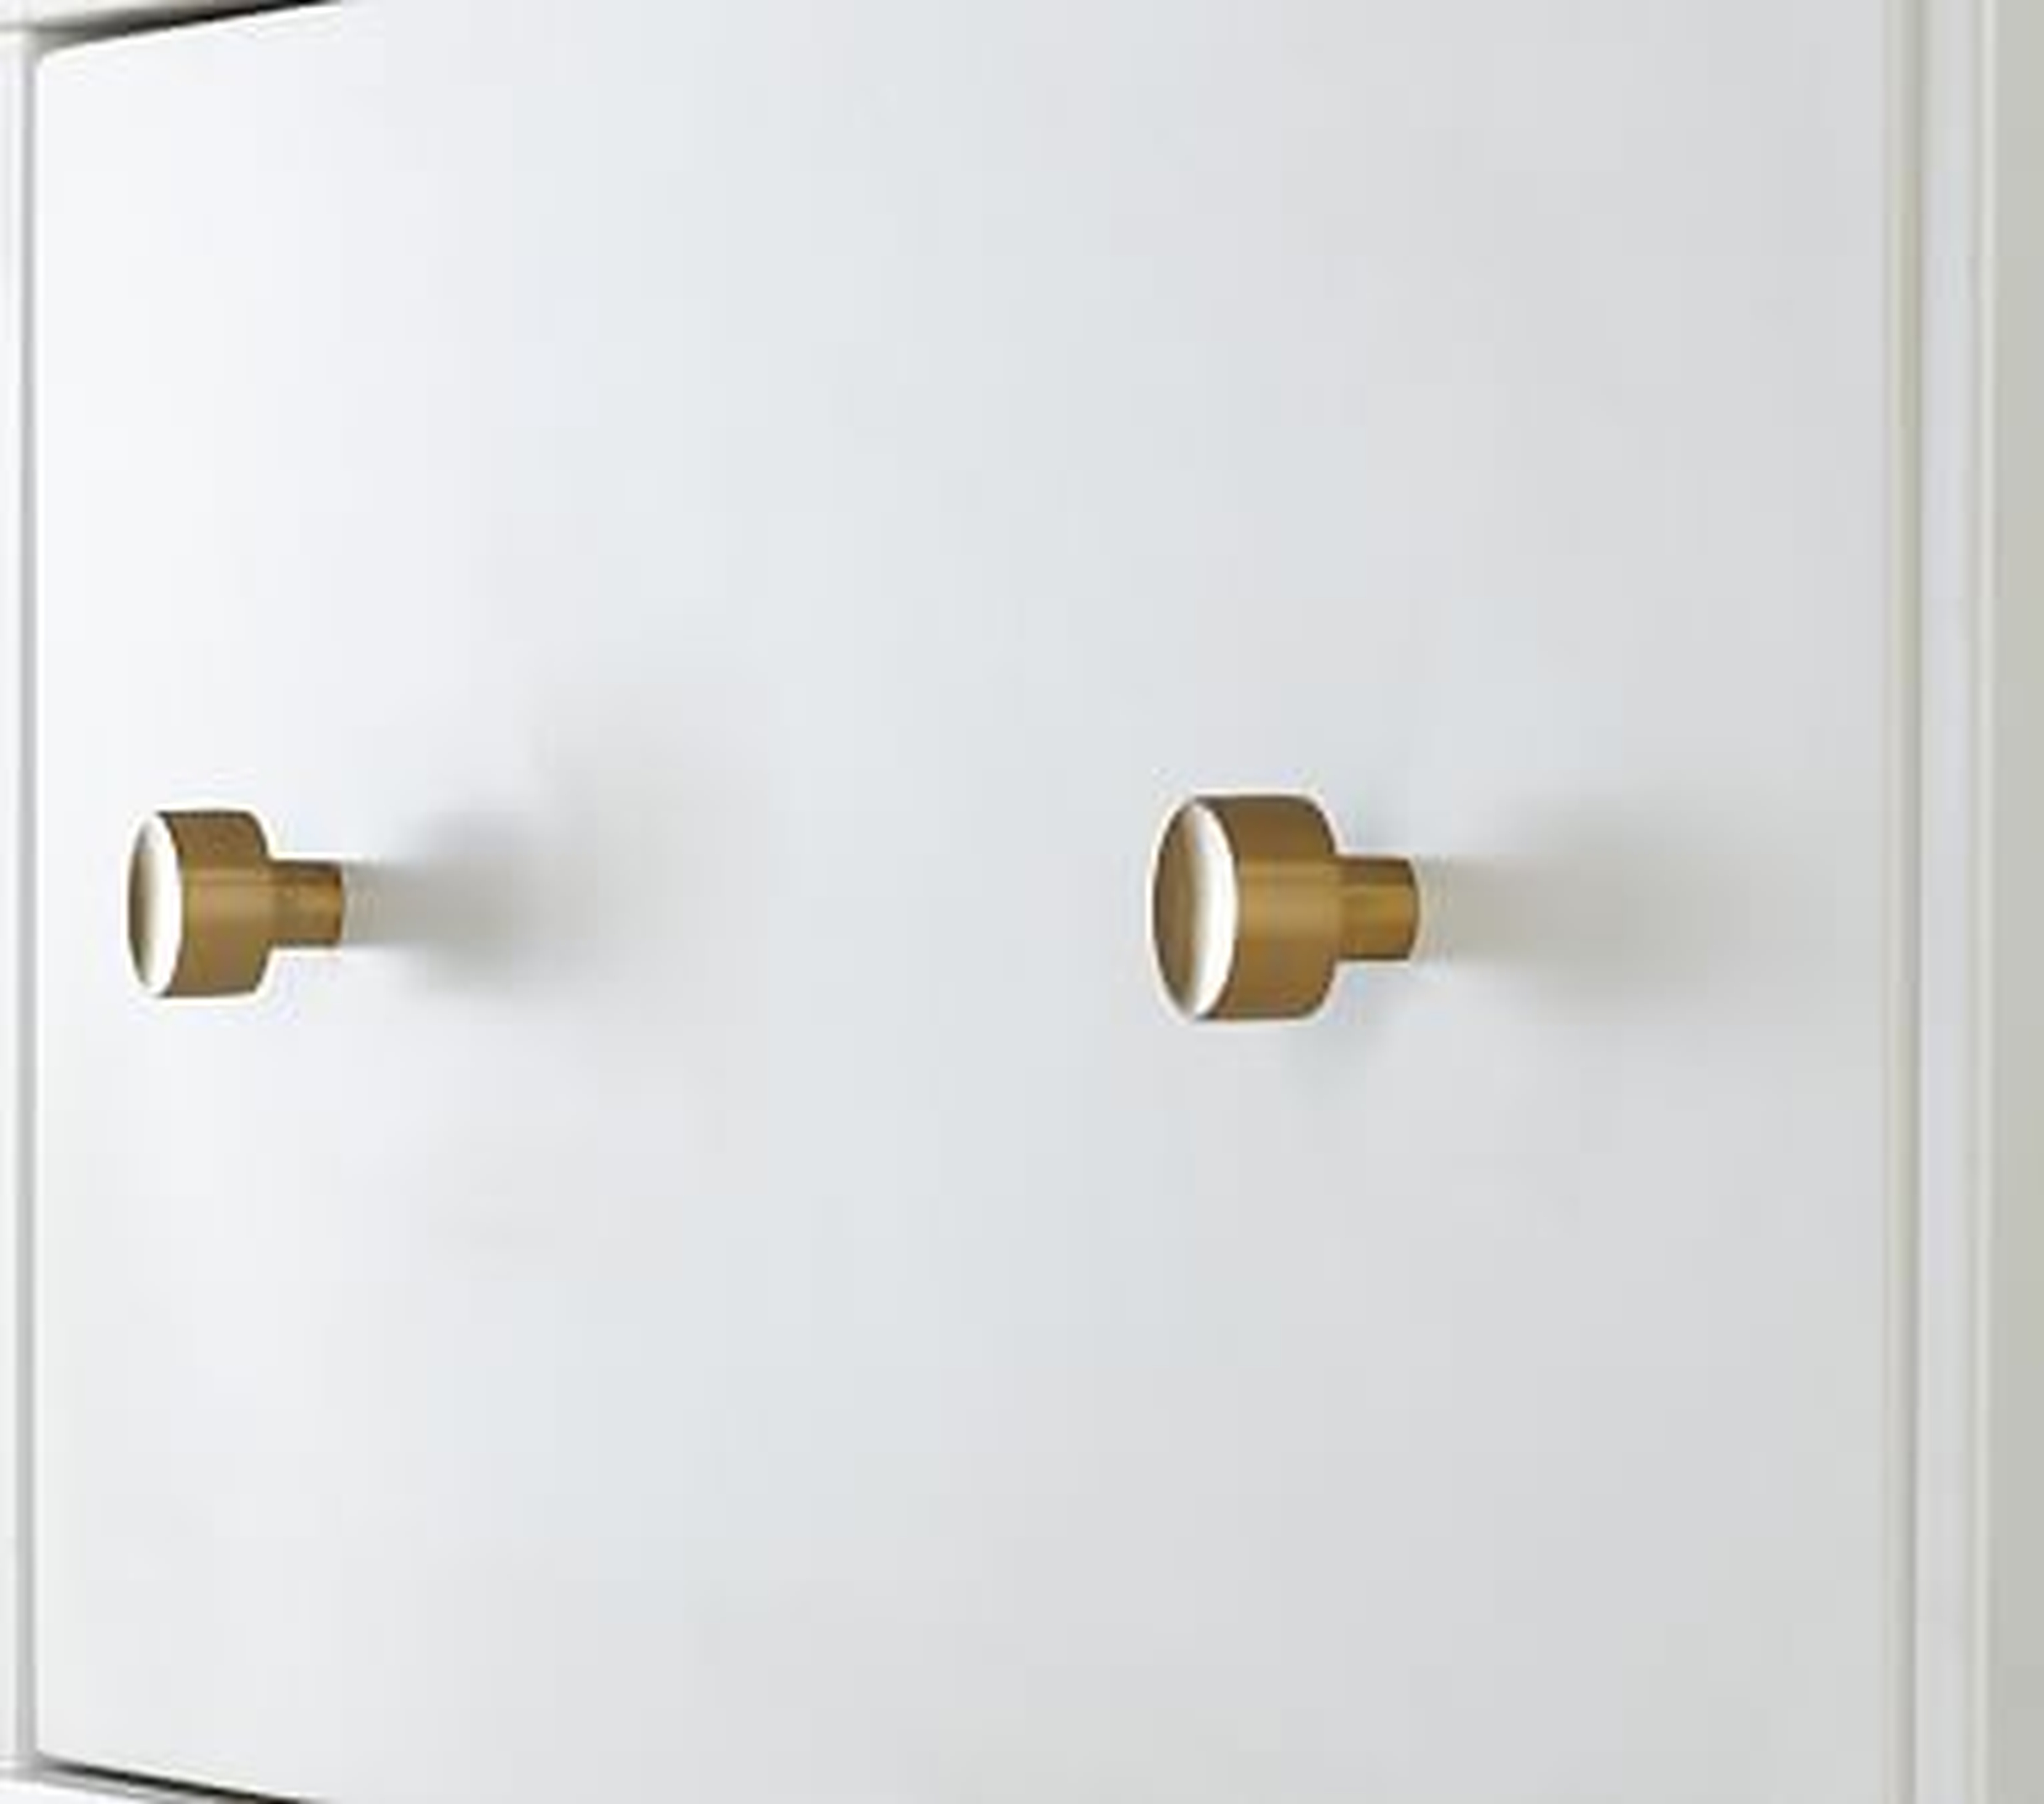 Cameron Wall System Traditional Cabinet Hardware, Brass, UPS- set of 2 - Pottery Barn Kids